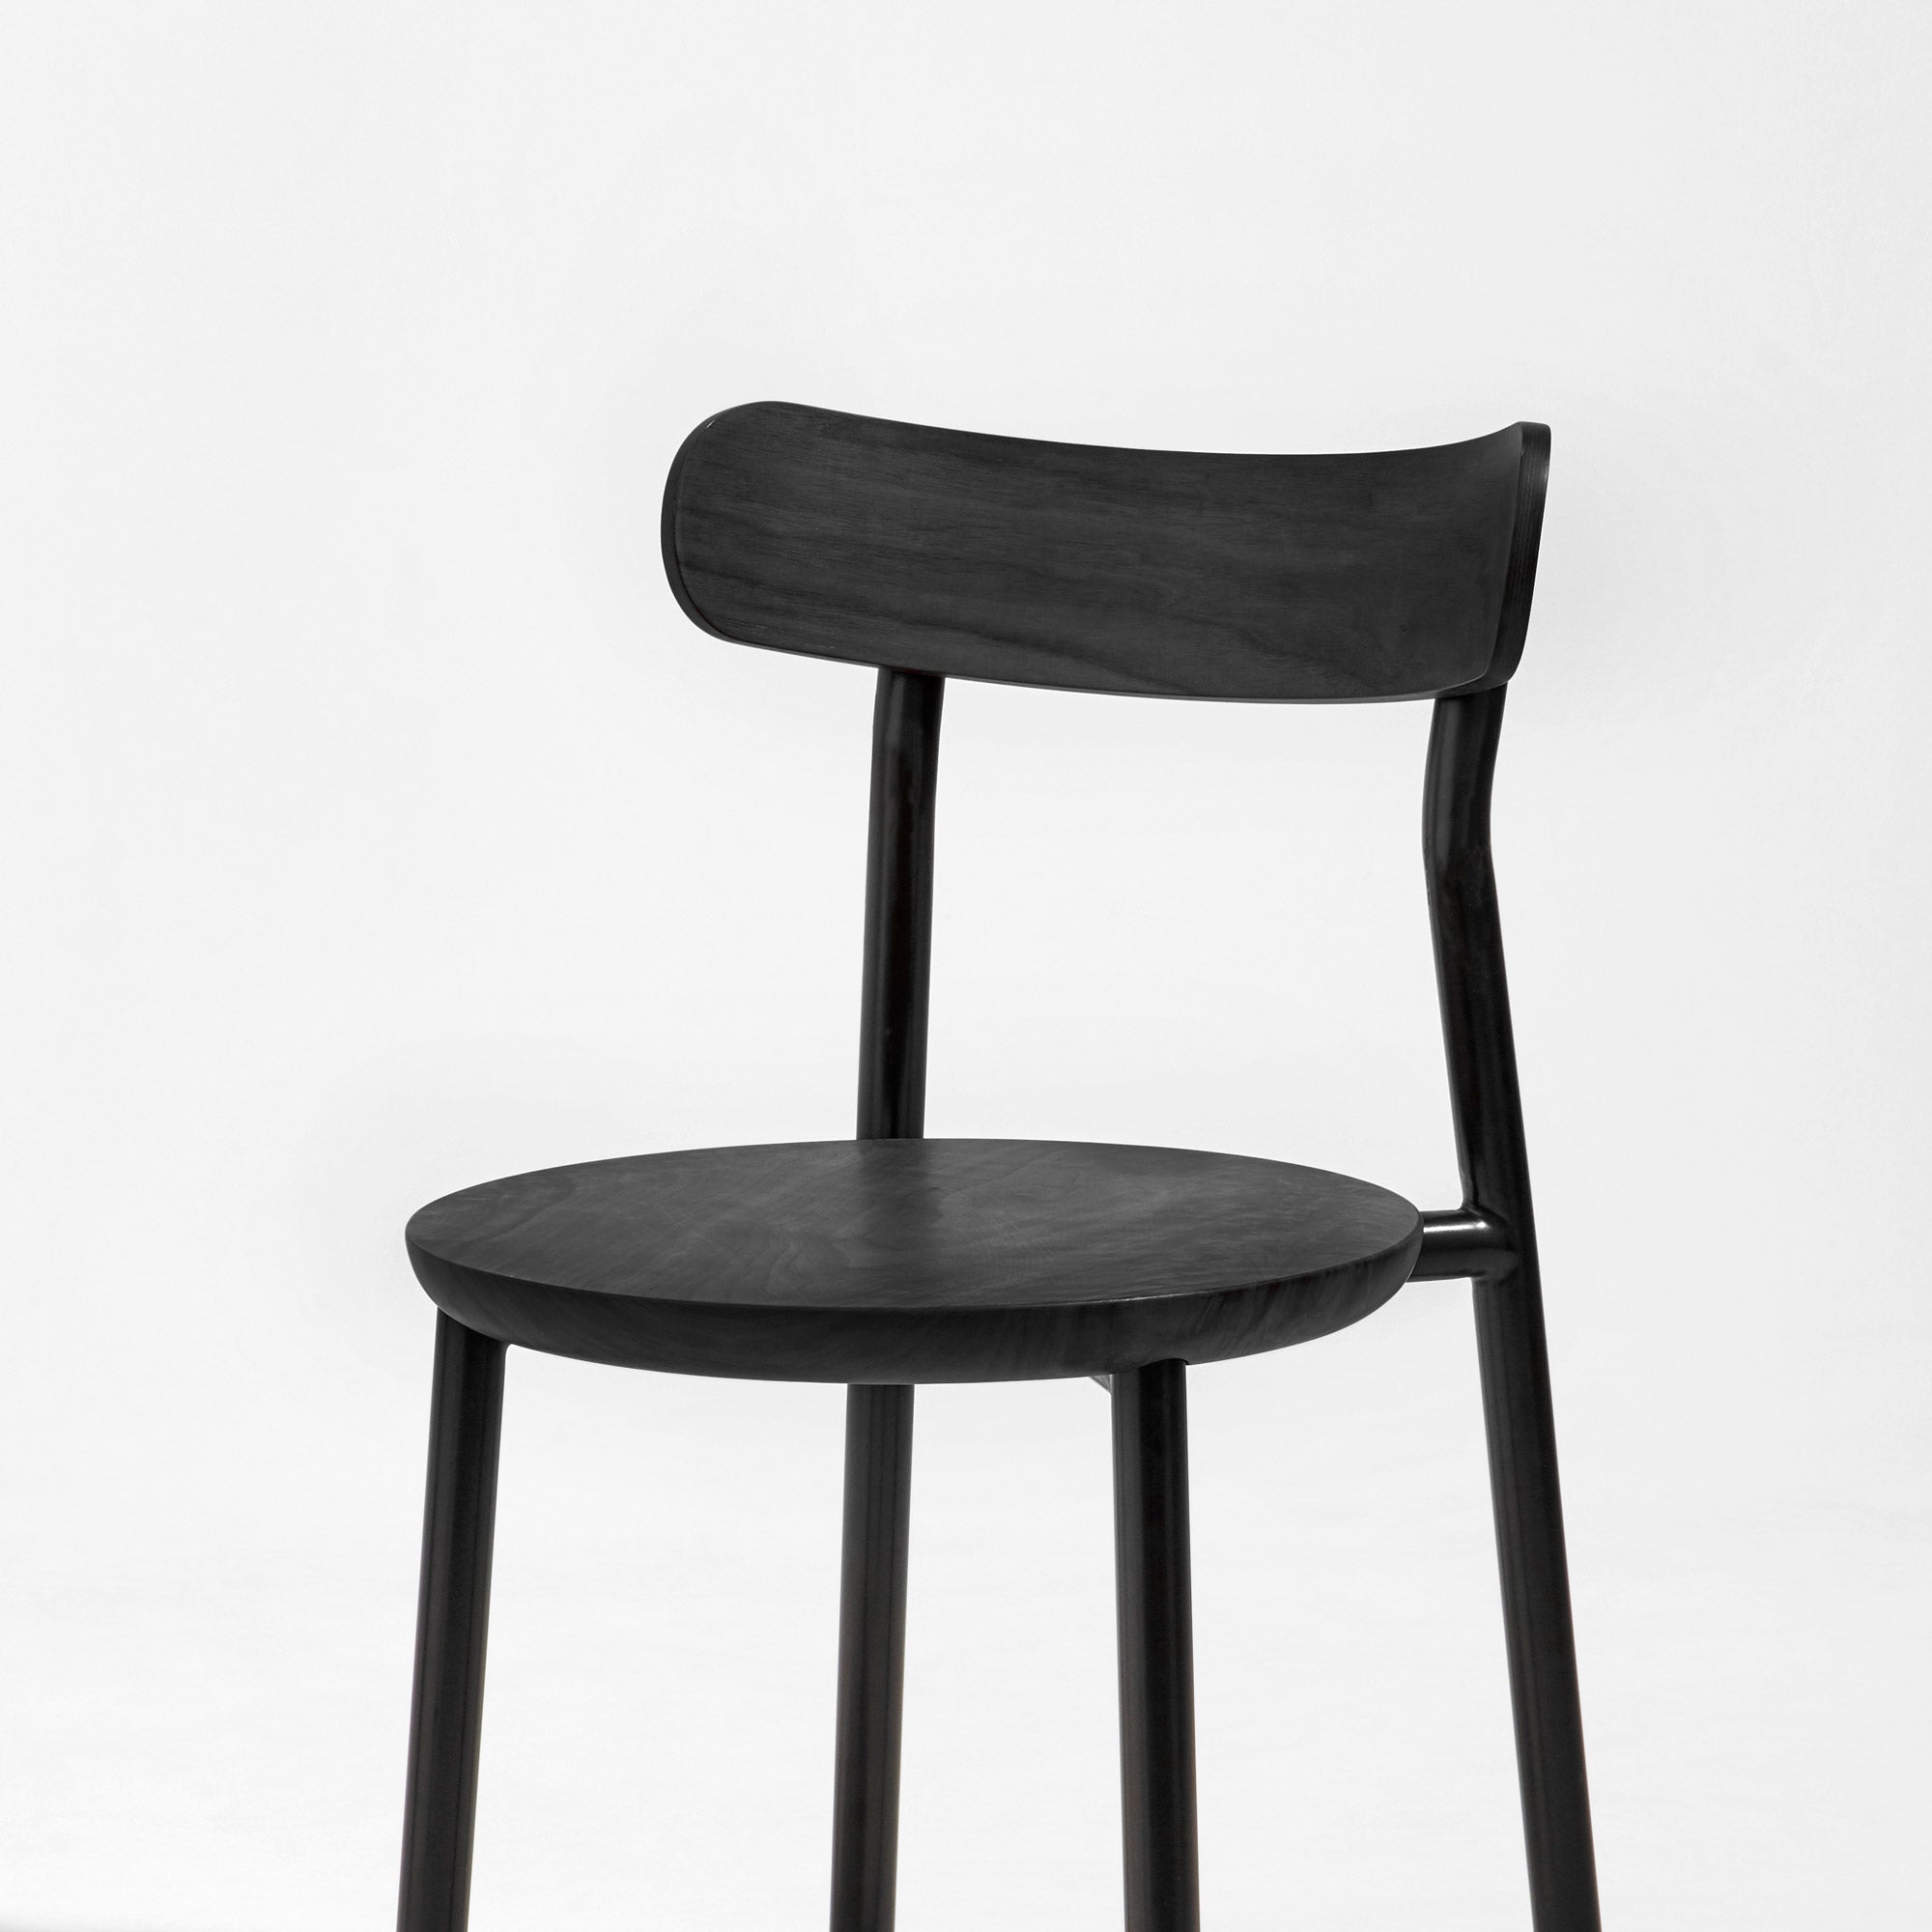 Them Chair Black Stained | Ash & Walnut Timber & Metal Dining Chair | GibsonKarlo | DesignByThem